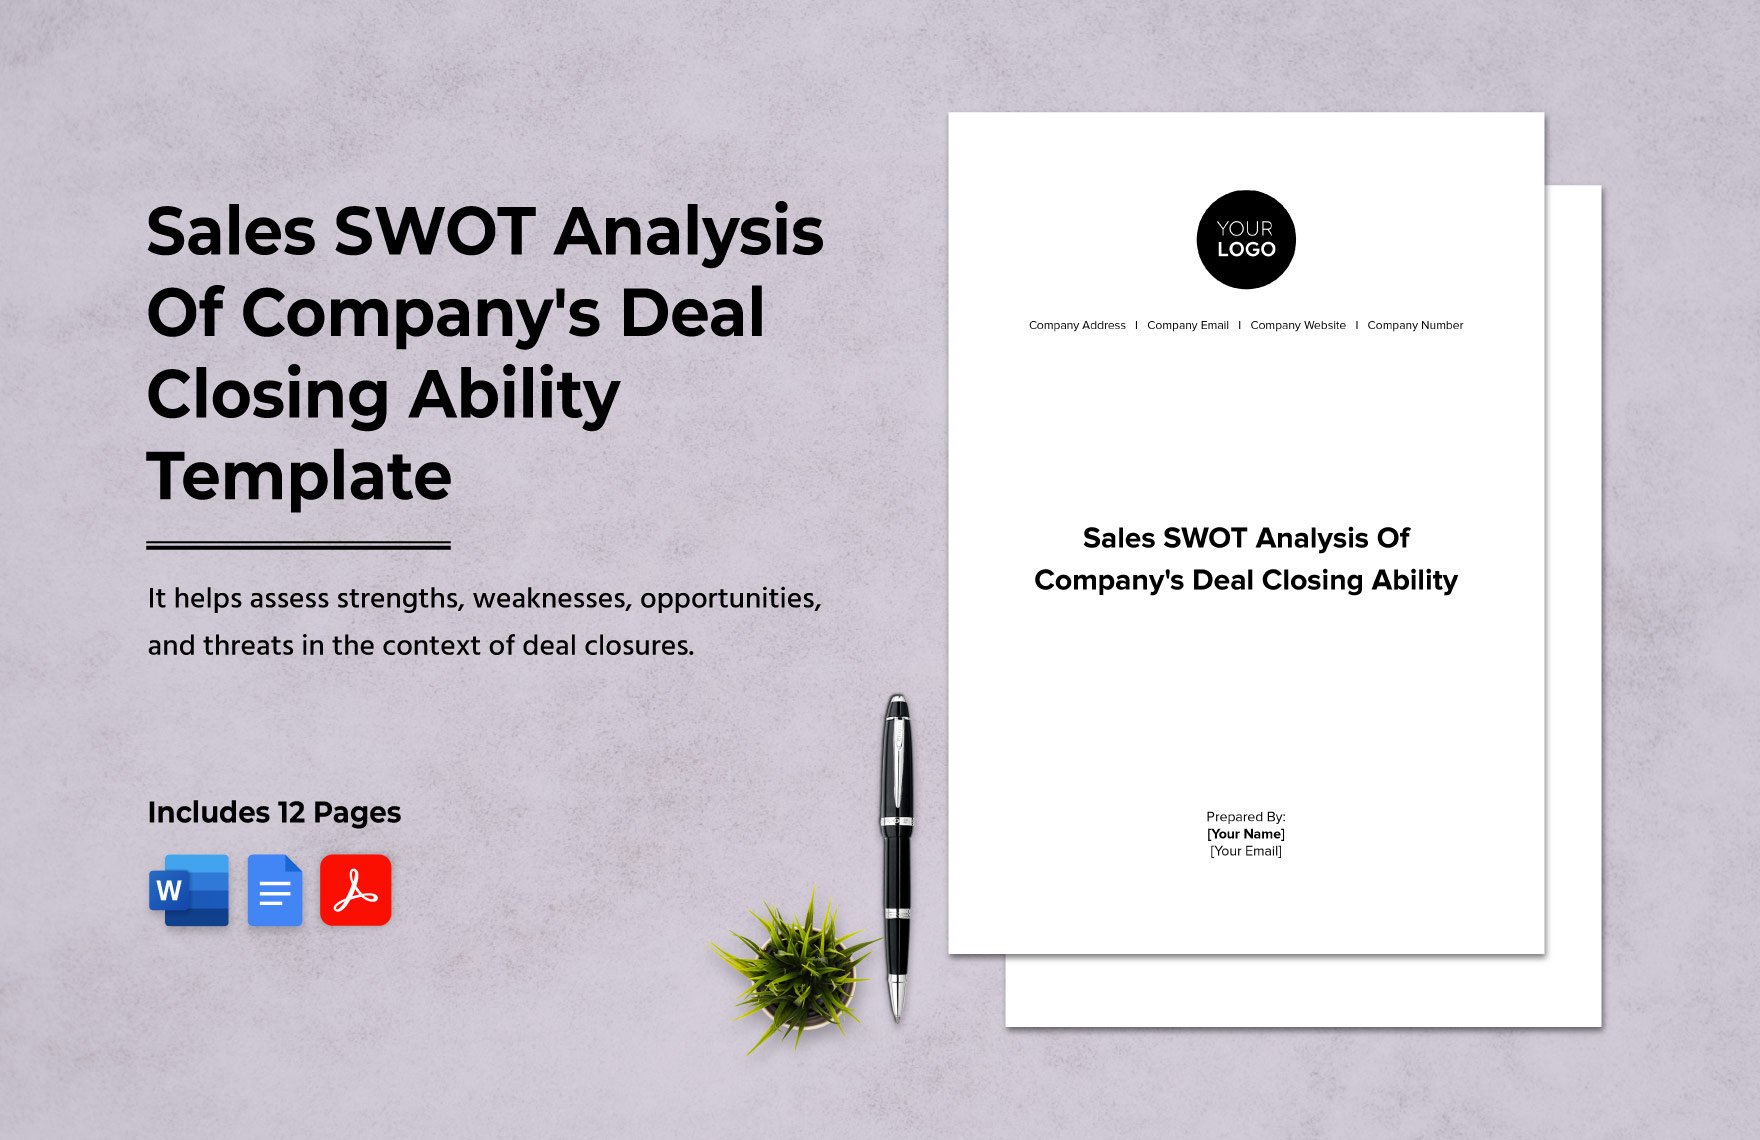 Sales SWOT Analysis Of Company's Deal Closing Ability Template